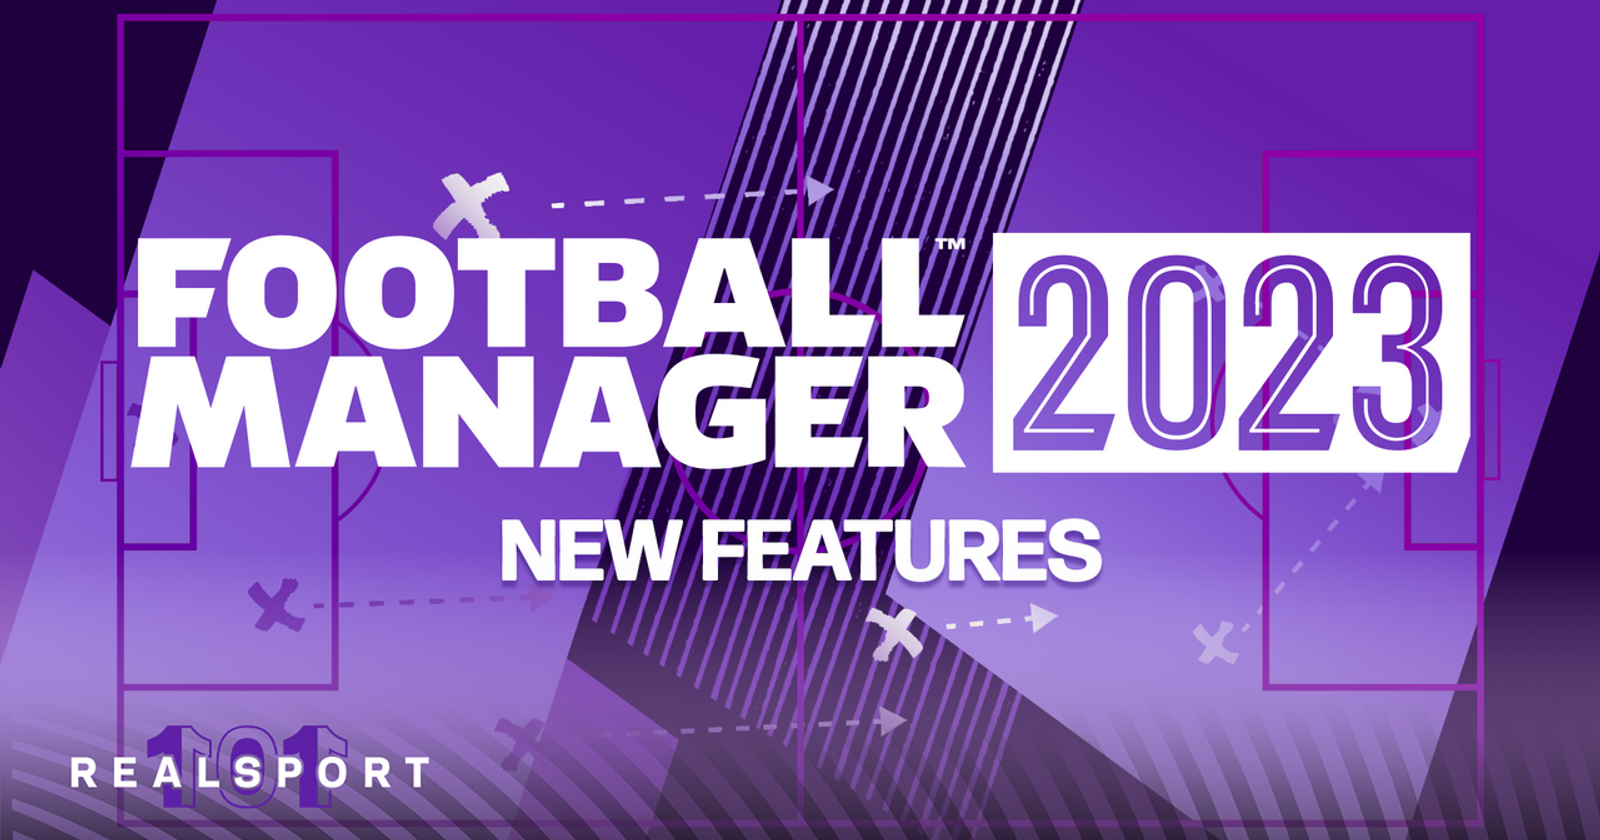 Football Manager 2023 Mobile – New Features unveiled